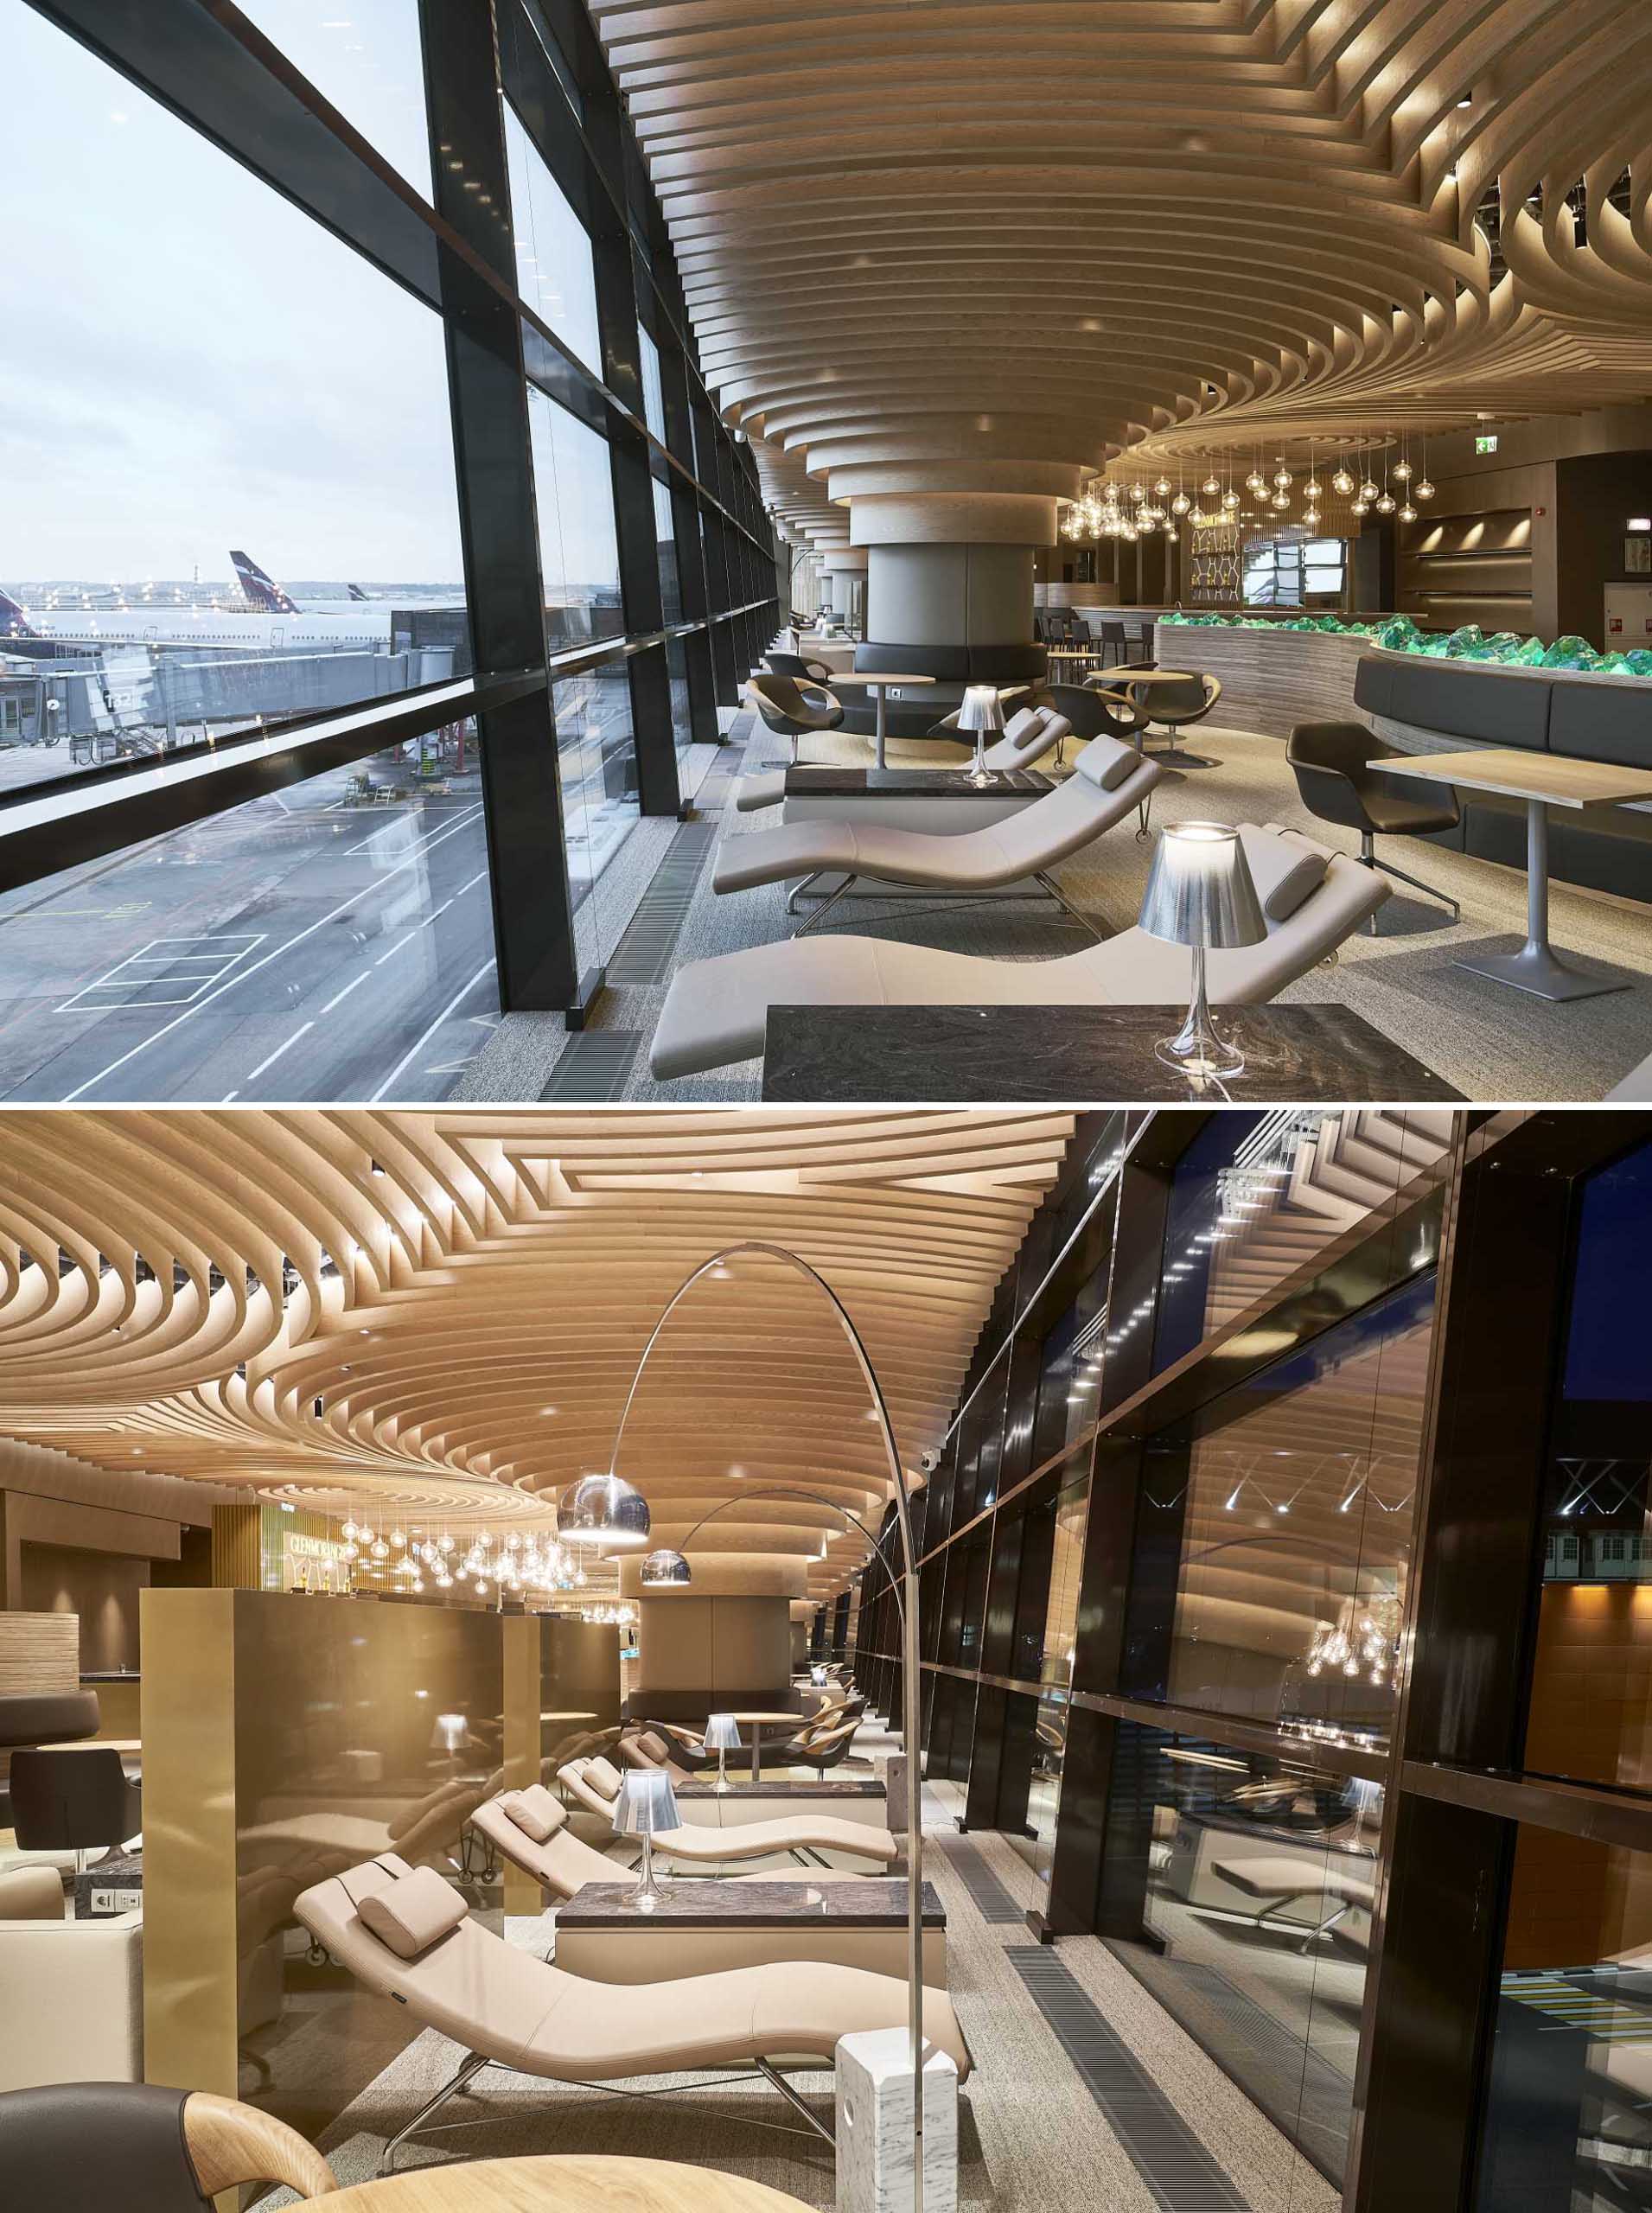 A modern airport lounge with a sculptural ceiling.